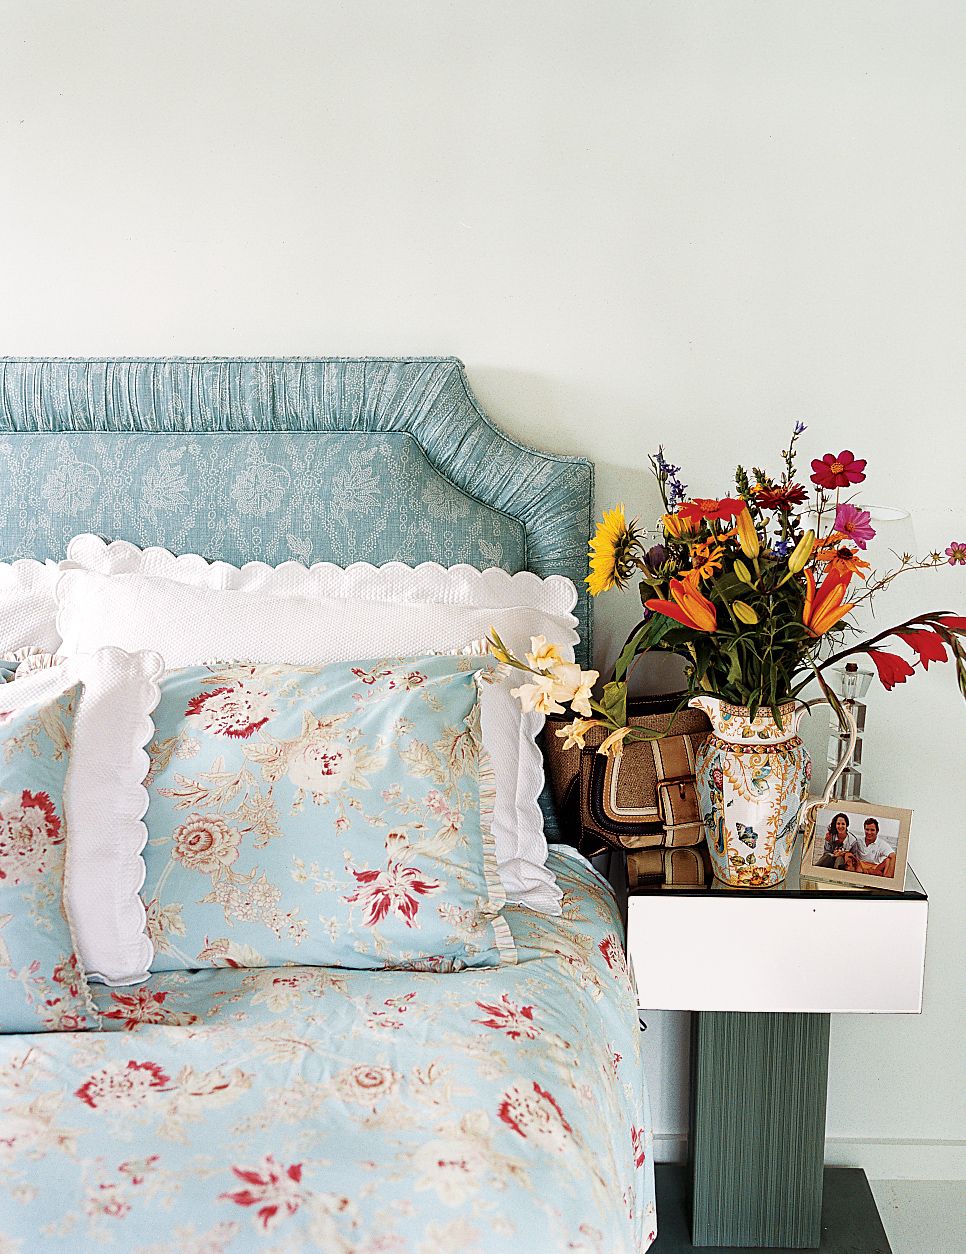 guest room at a family's compound off the coast of Maine features fresh wildflowers from a nearby farmer's market